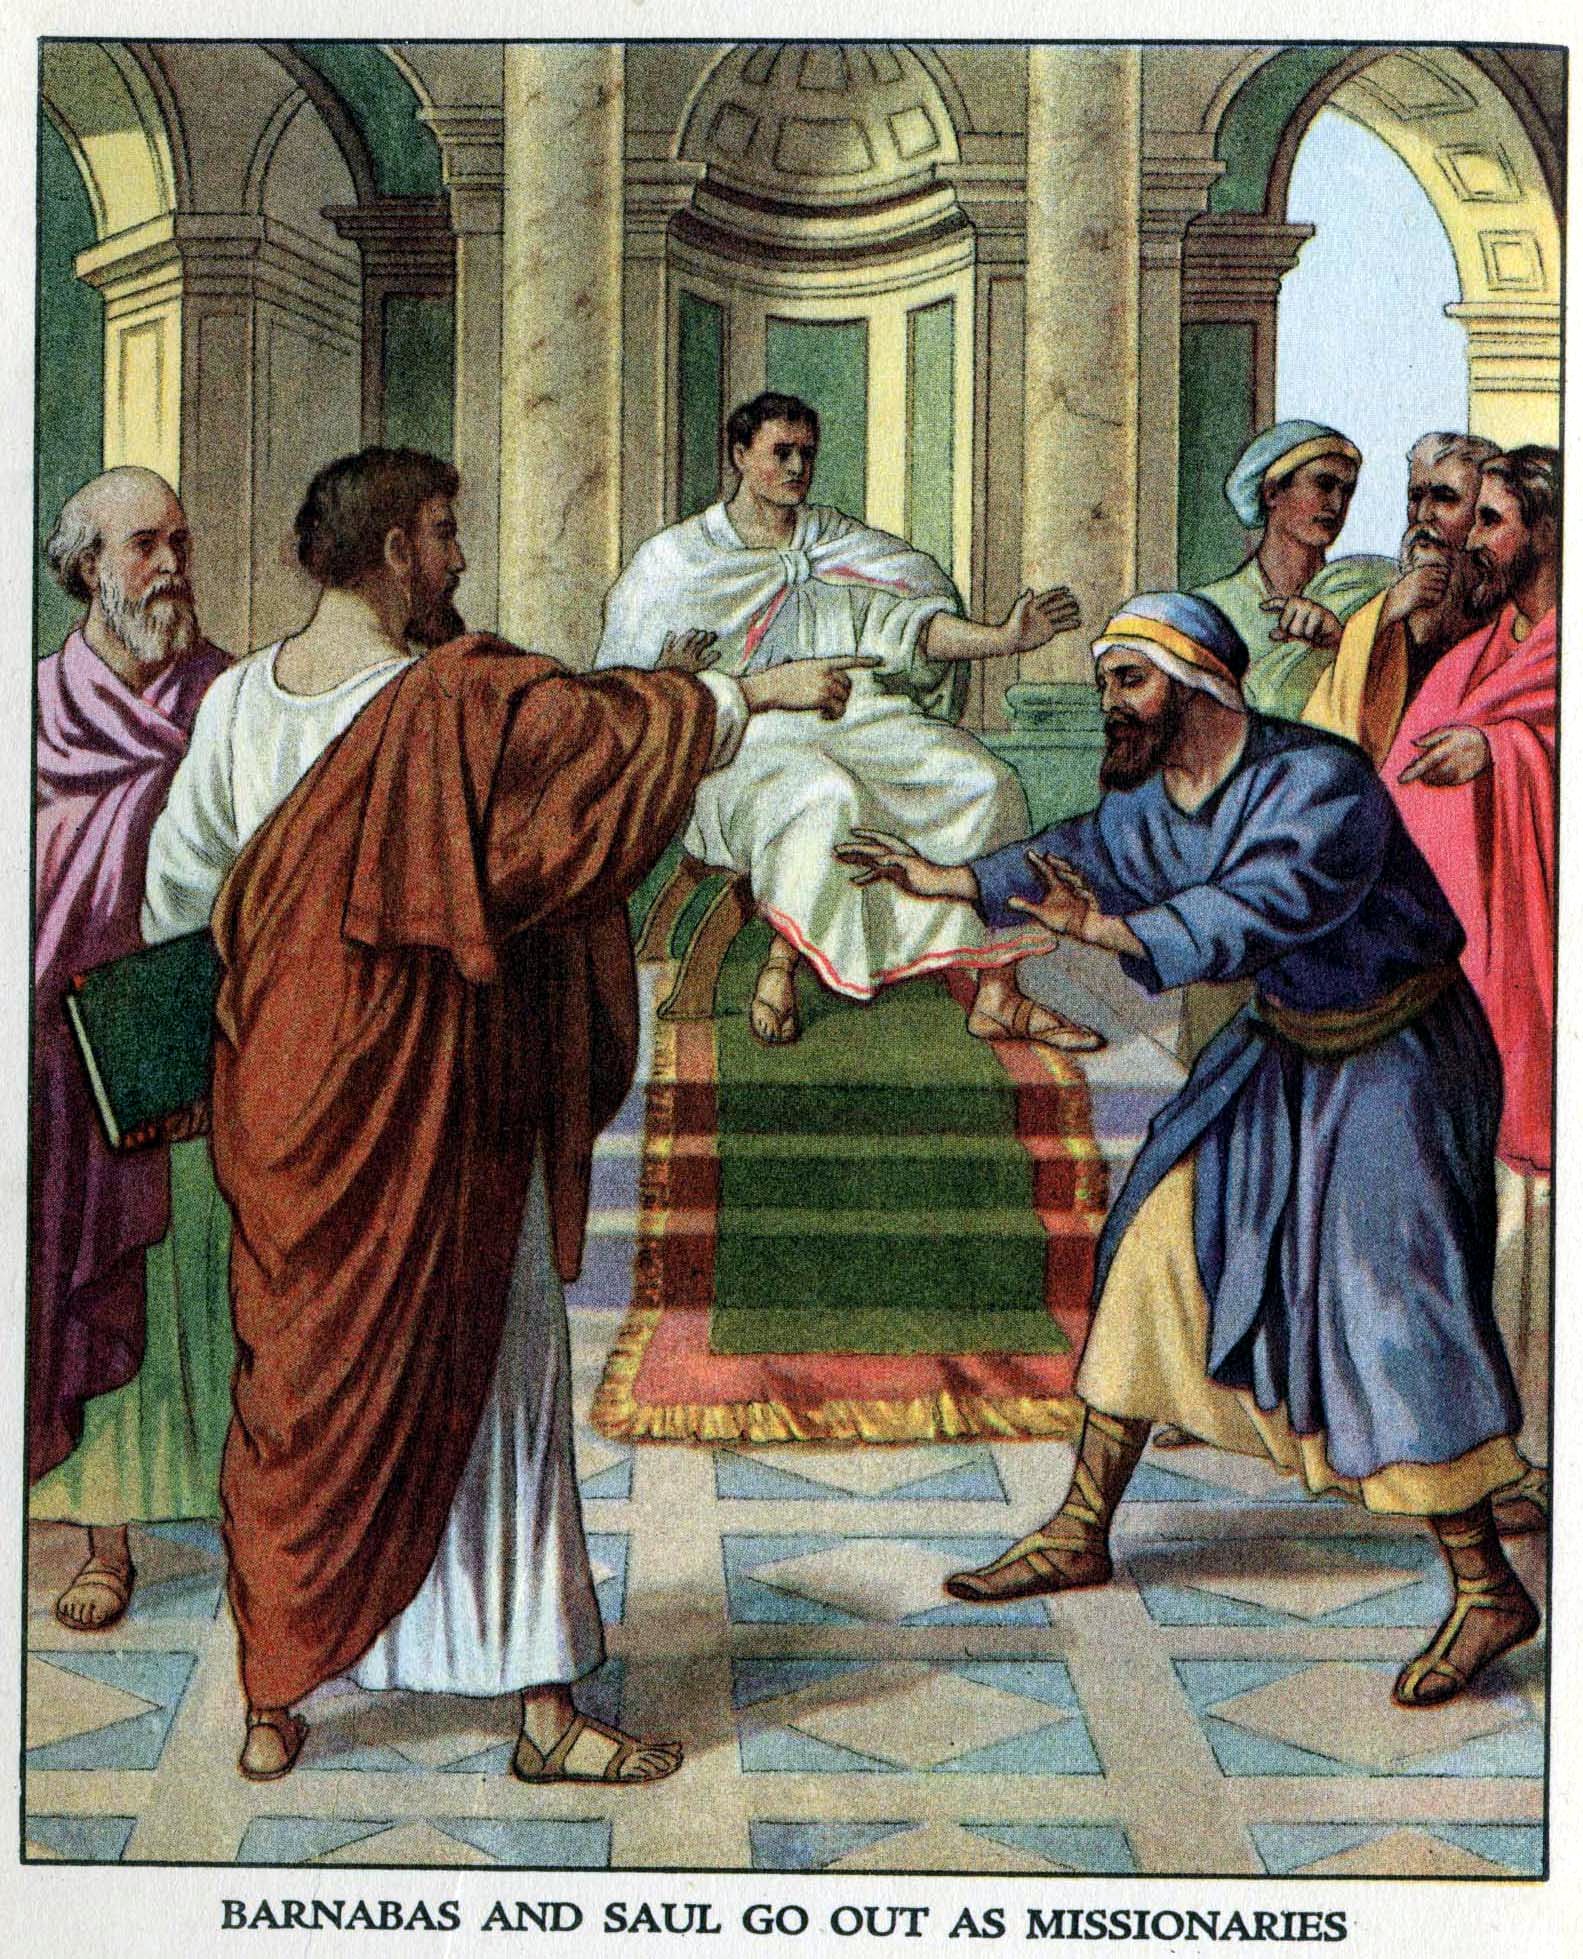 Barnabas and Saul go out as Missionaries